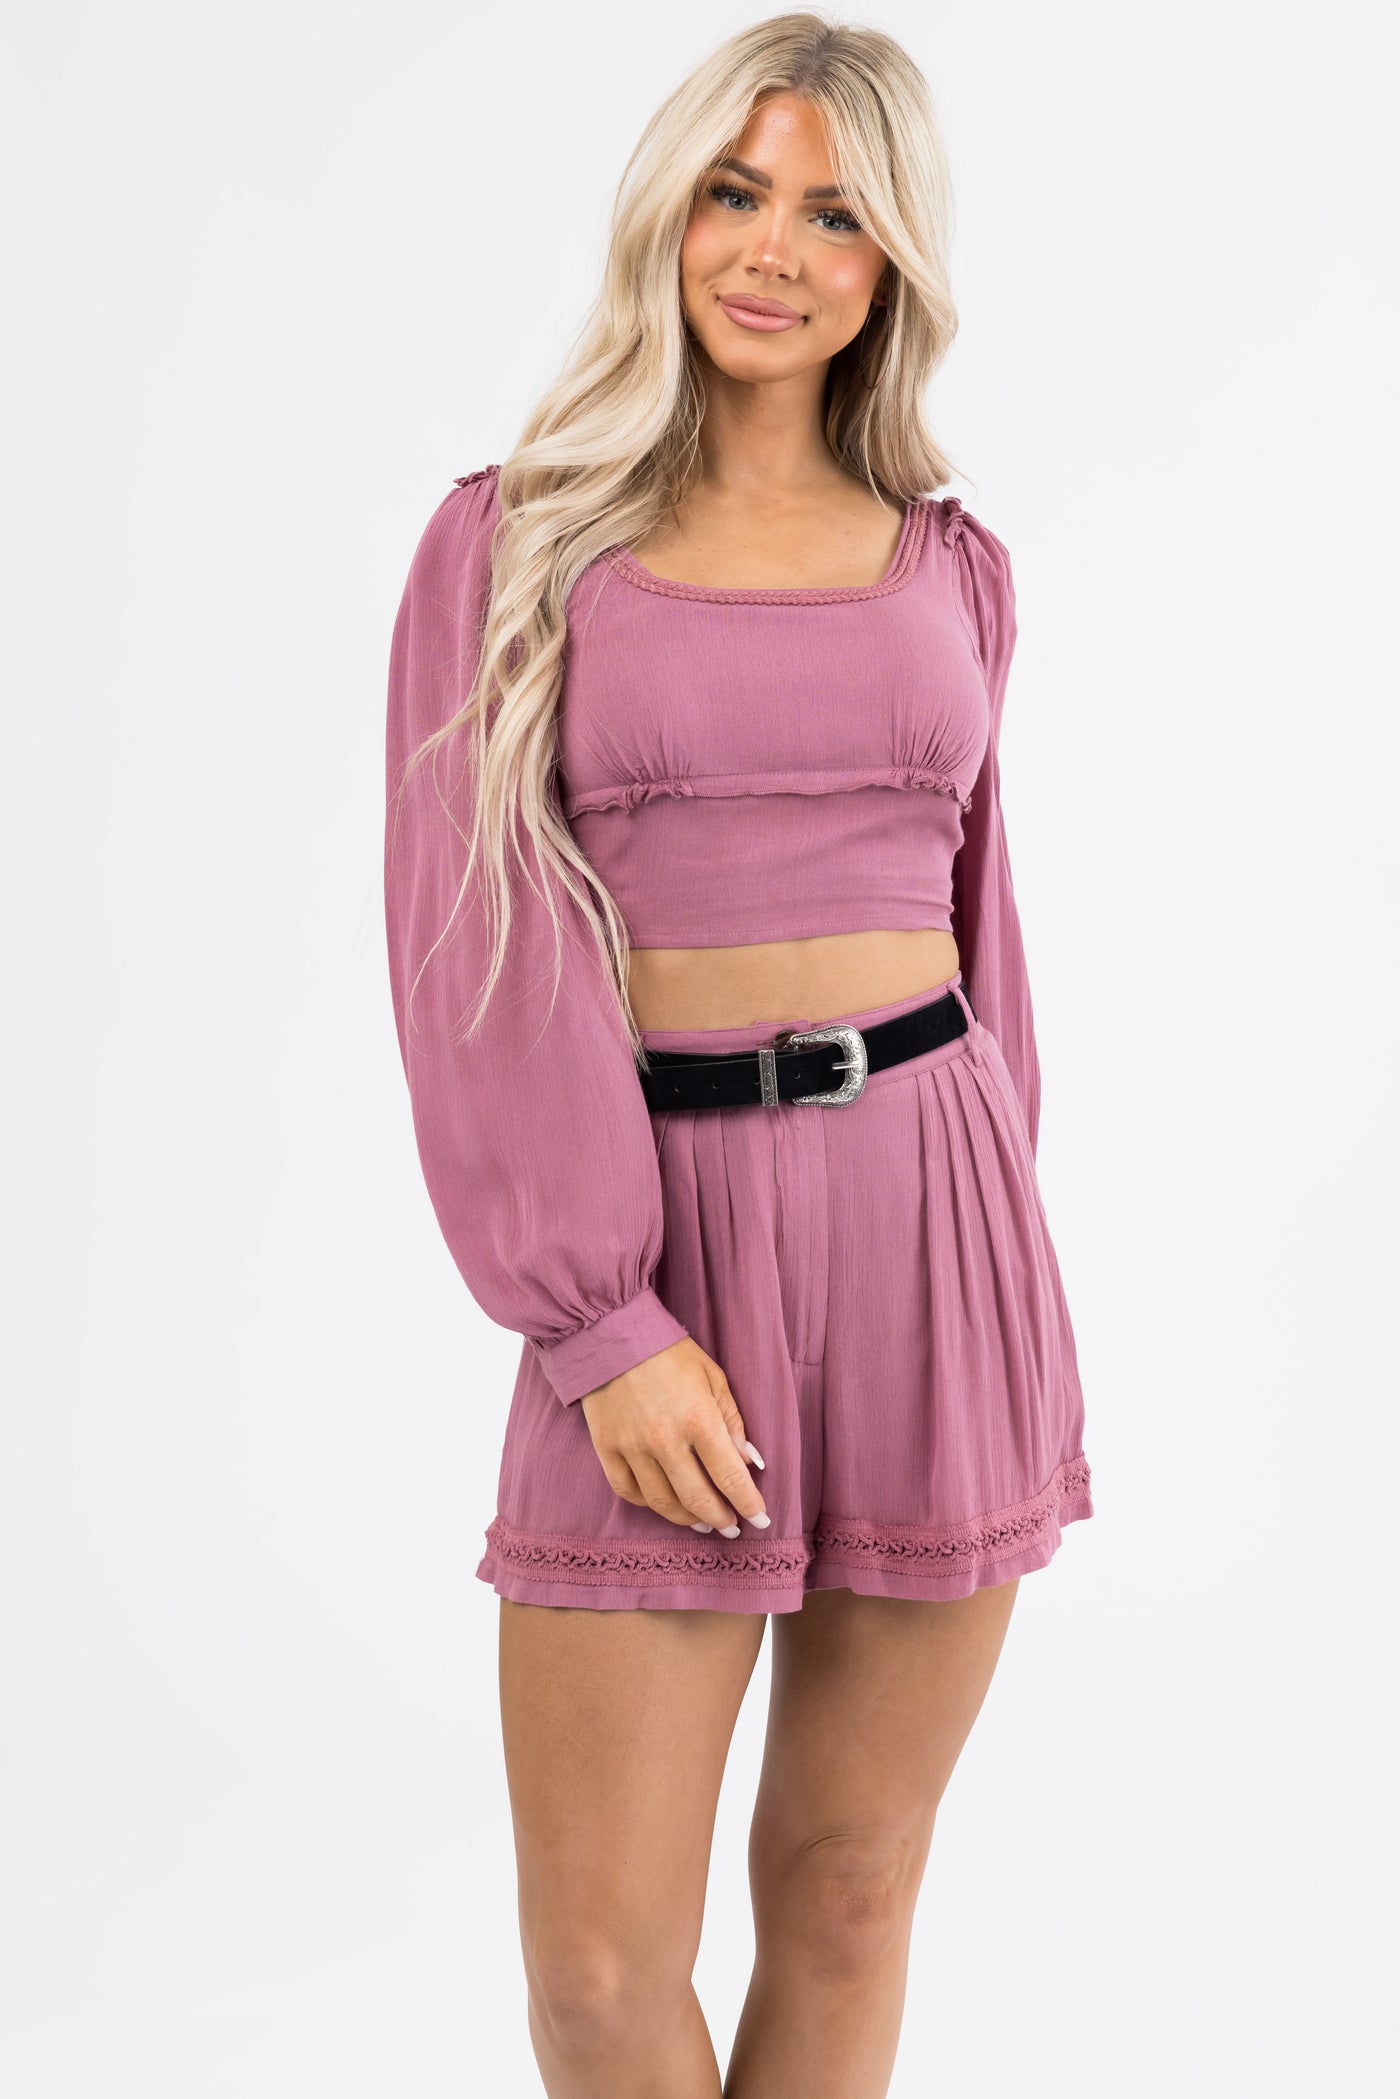 Berry Woven Shorts and Crop Top Set